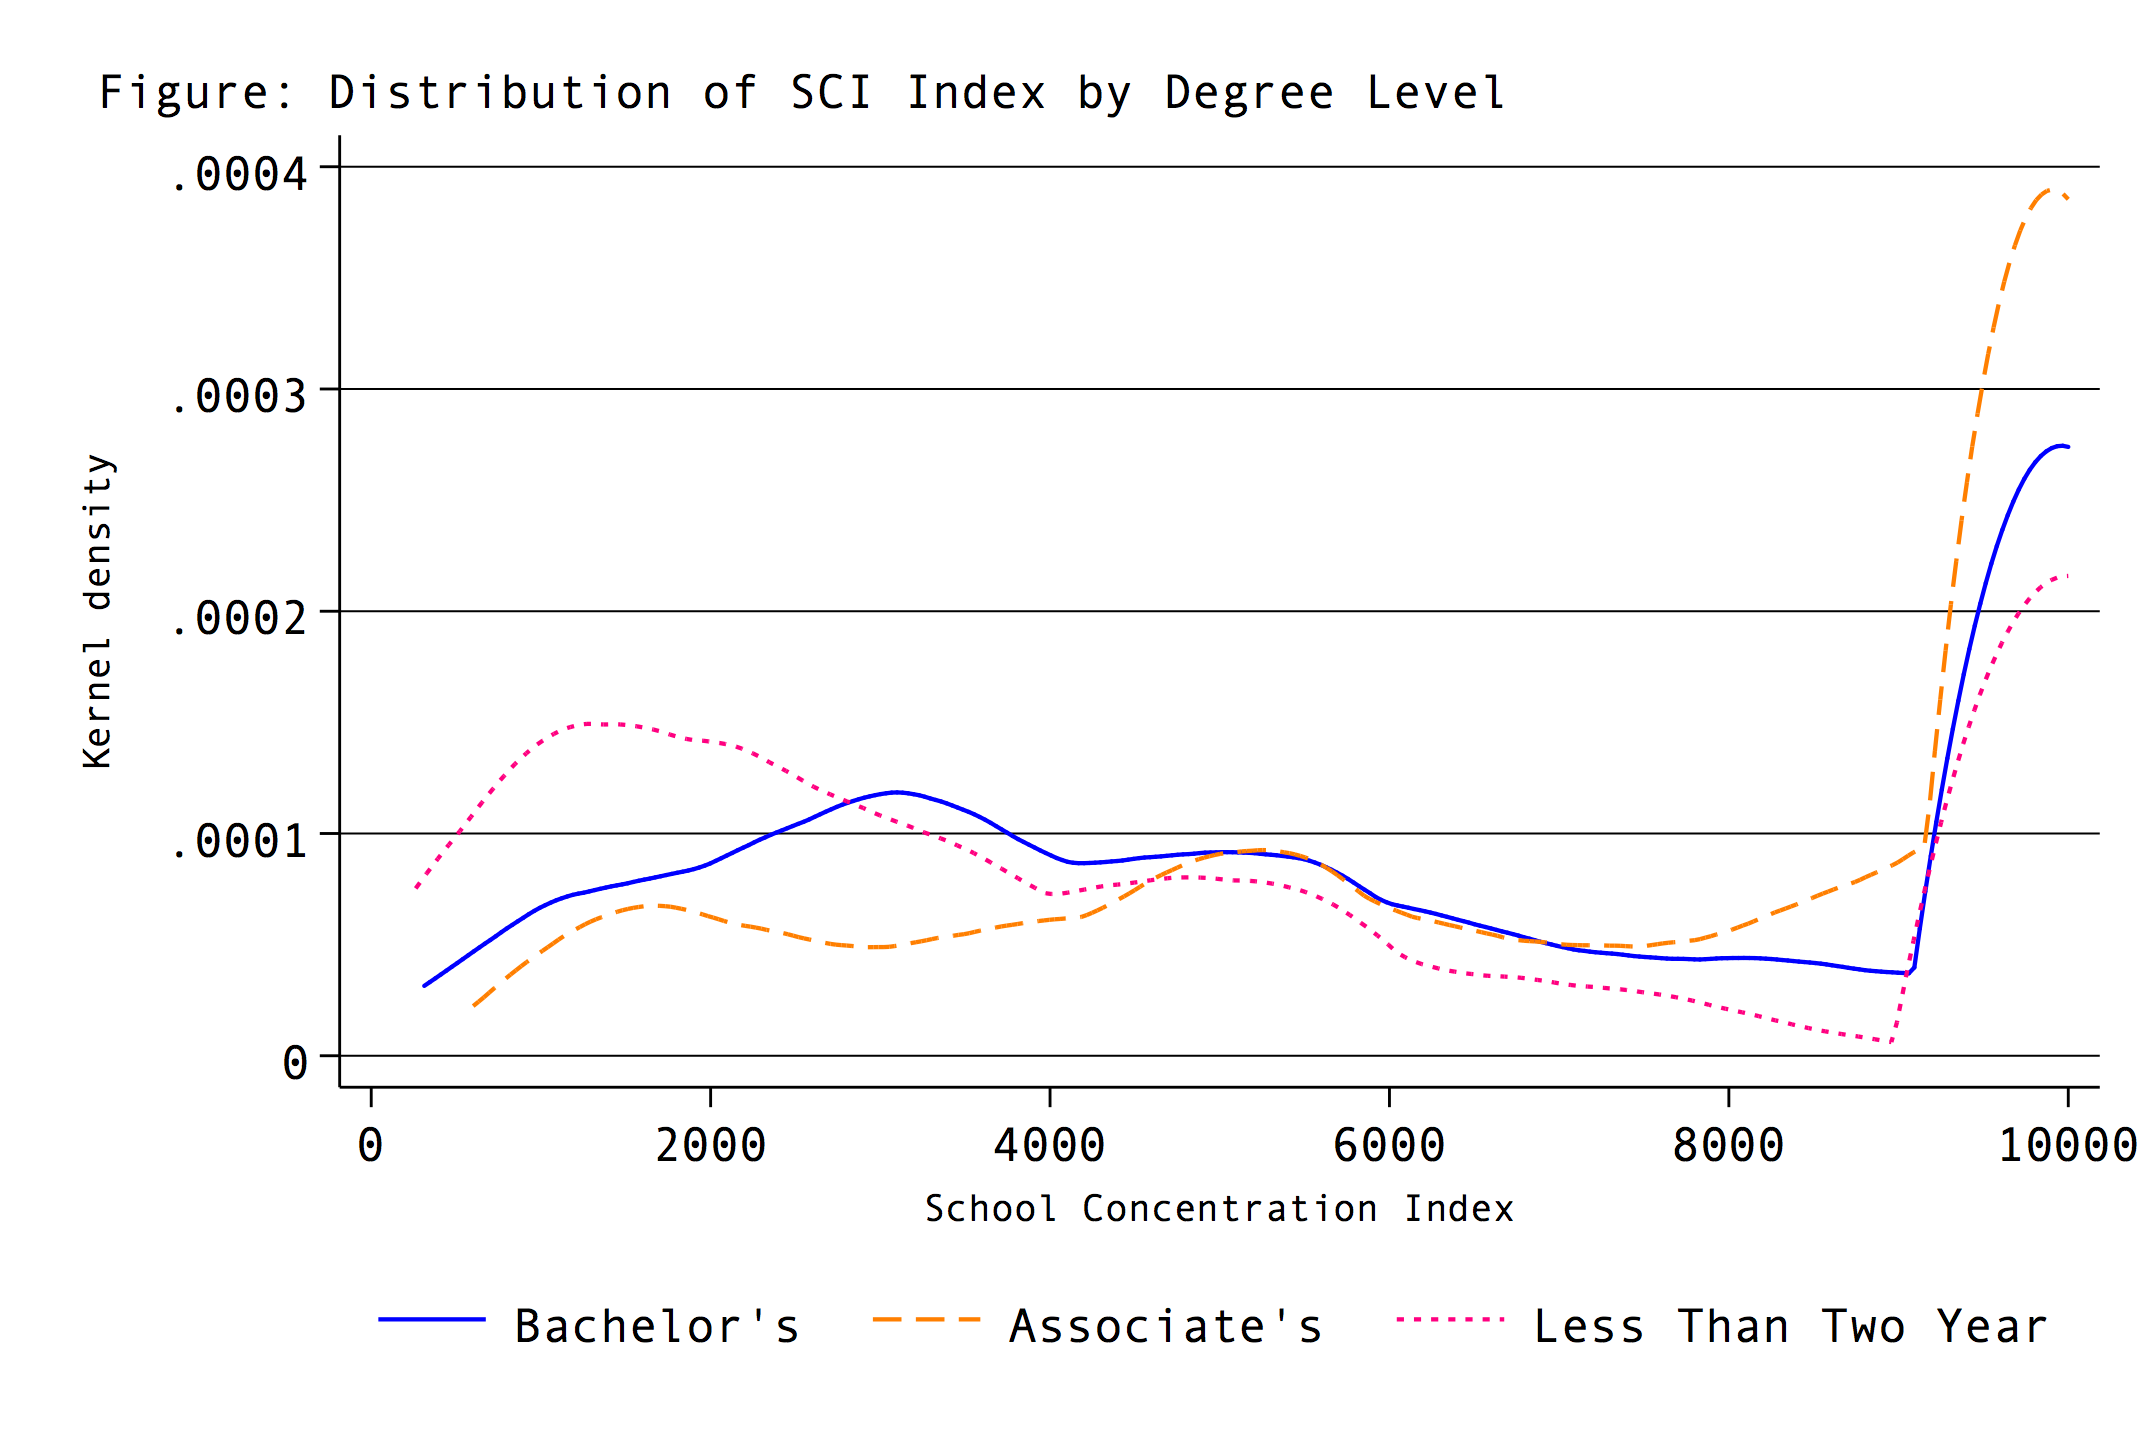 Extremely right-skewed SCI density curves across all institution levels.